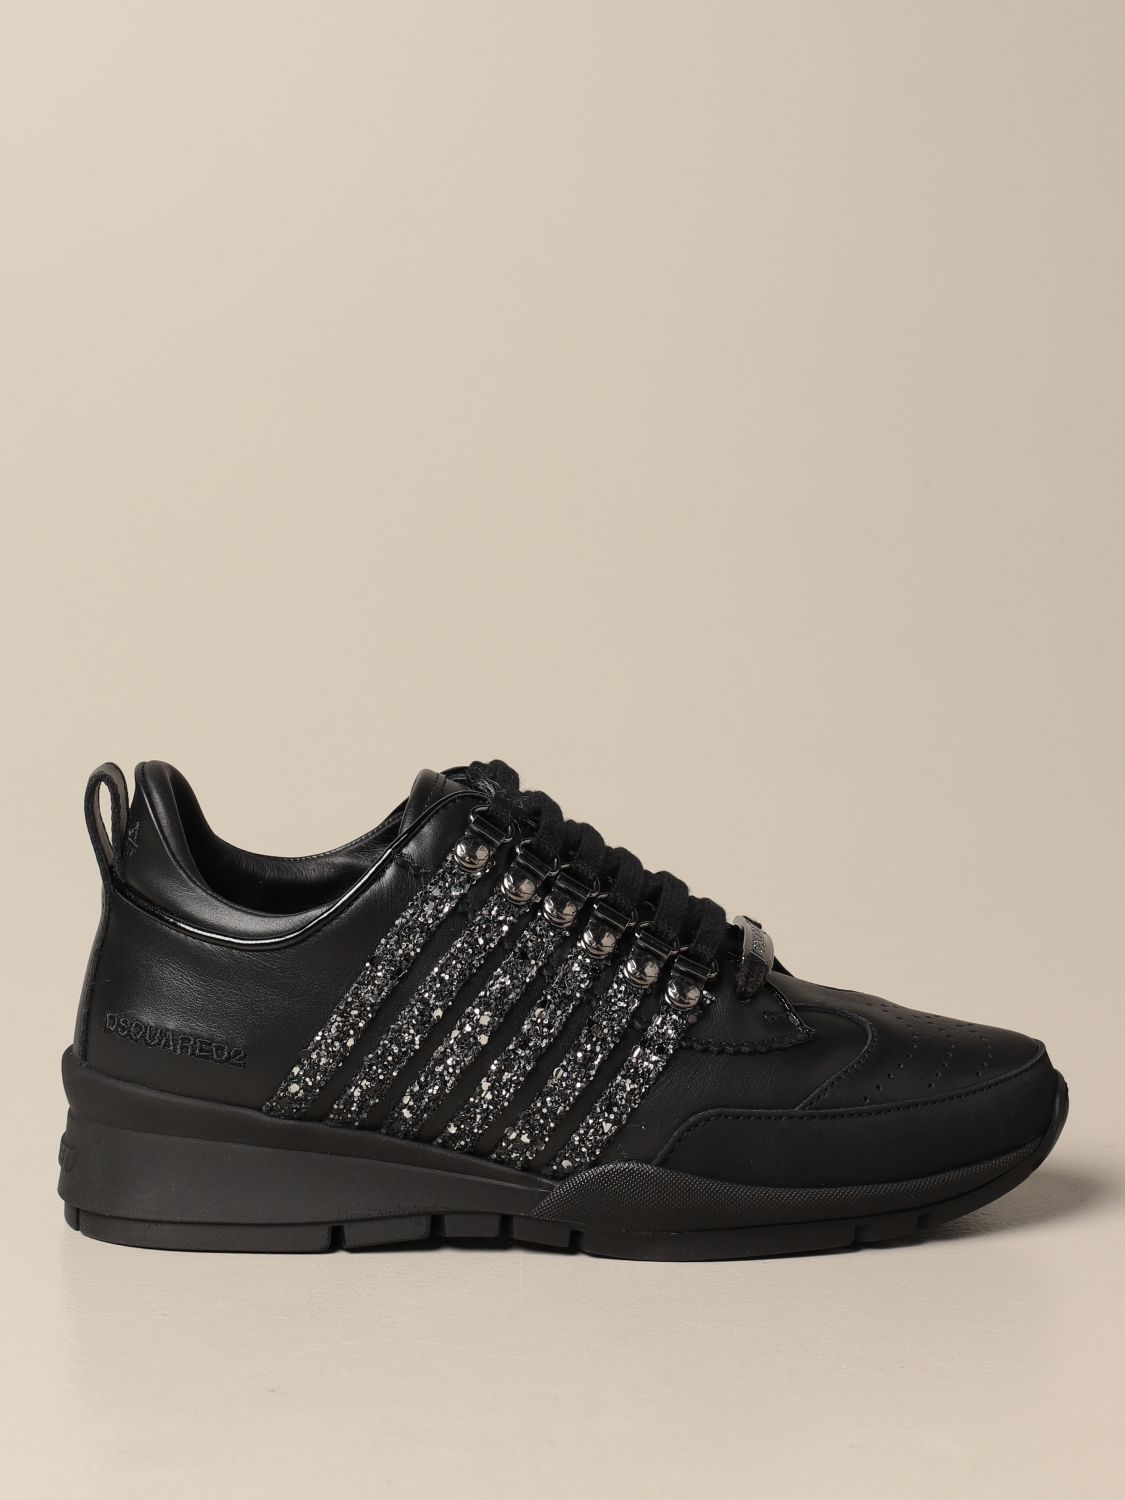 Purper tragedie Pompeii Dsquared2 Outlet: 251 sneakers in leather with glitter bands - Black | Dsquared2  sneakers SNW0109 06501472-CALF+GLITTER online on GIGLIO.COM